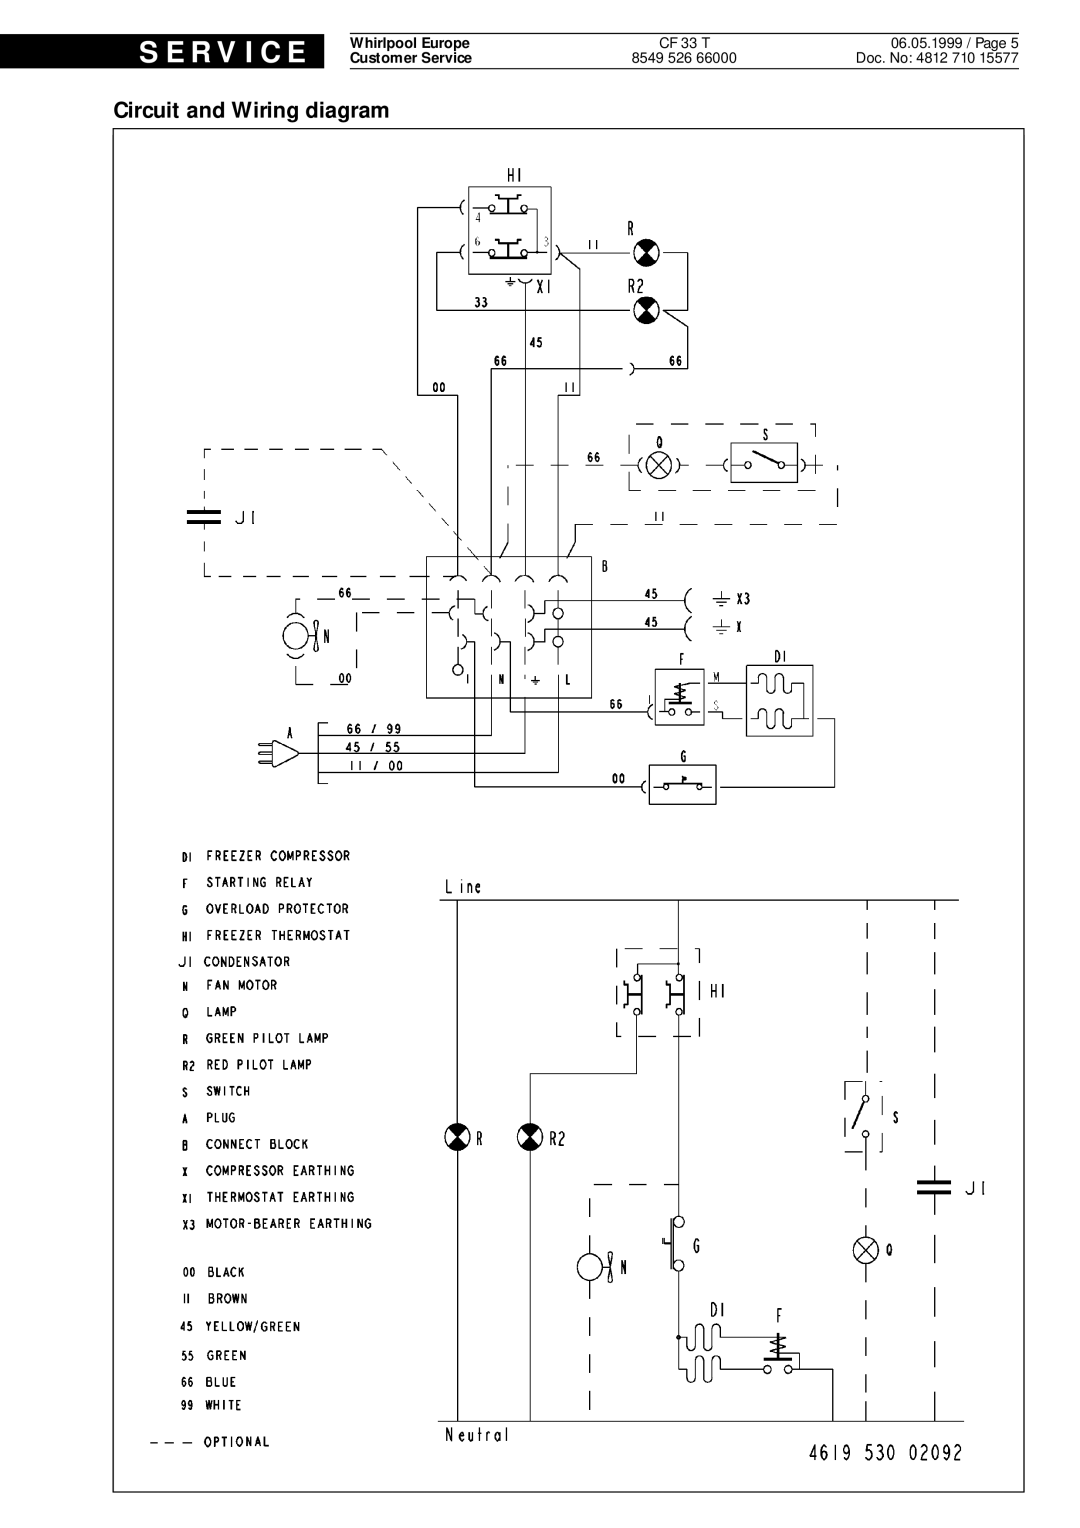 Whirlpool CF 33 T Circuit and Wiring diagram, S E R V I C E, Whirlpool Europe, Customer Service, 06.05.1999 / Page 